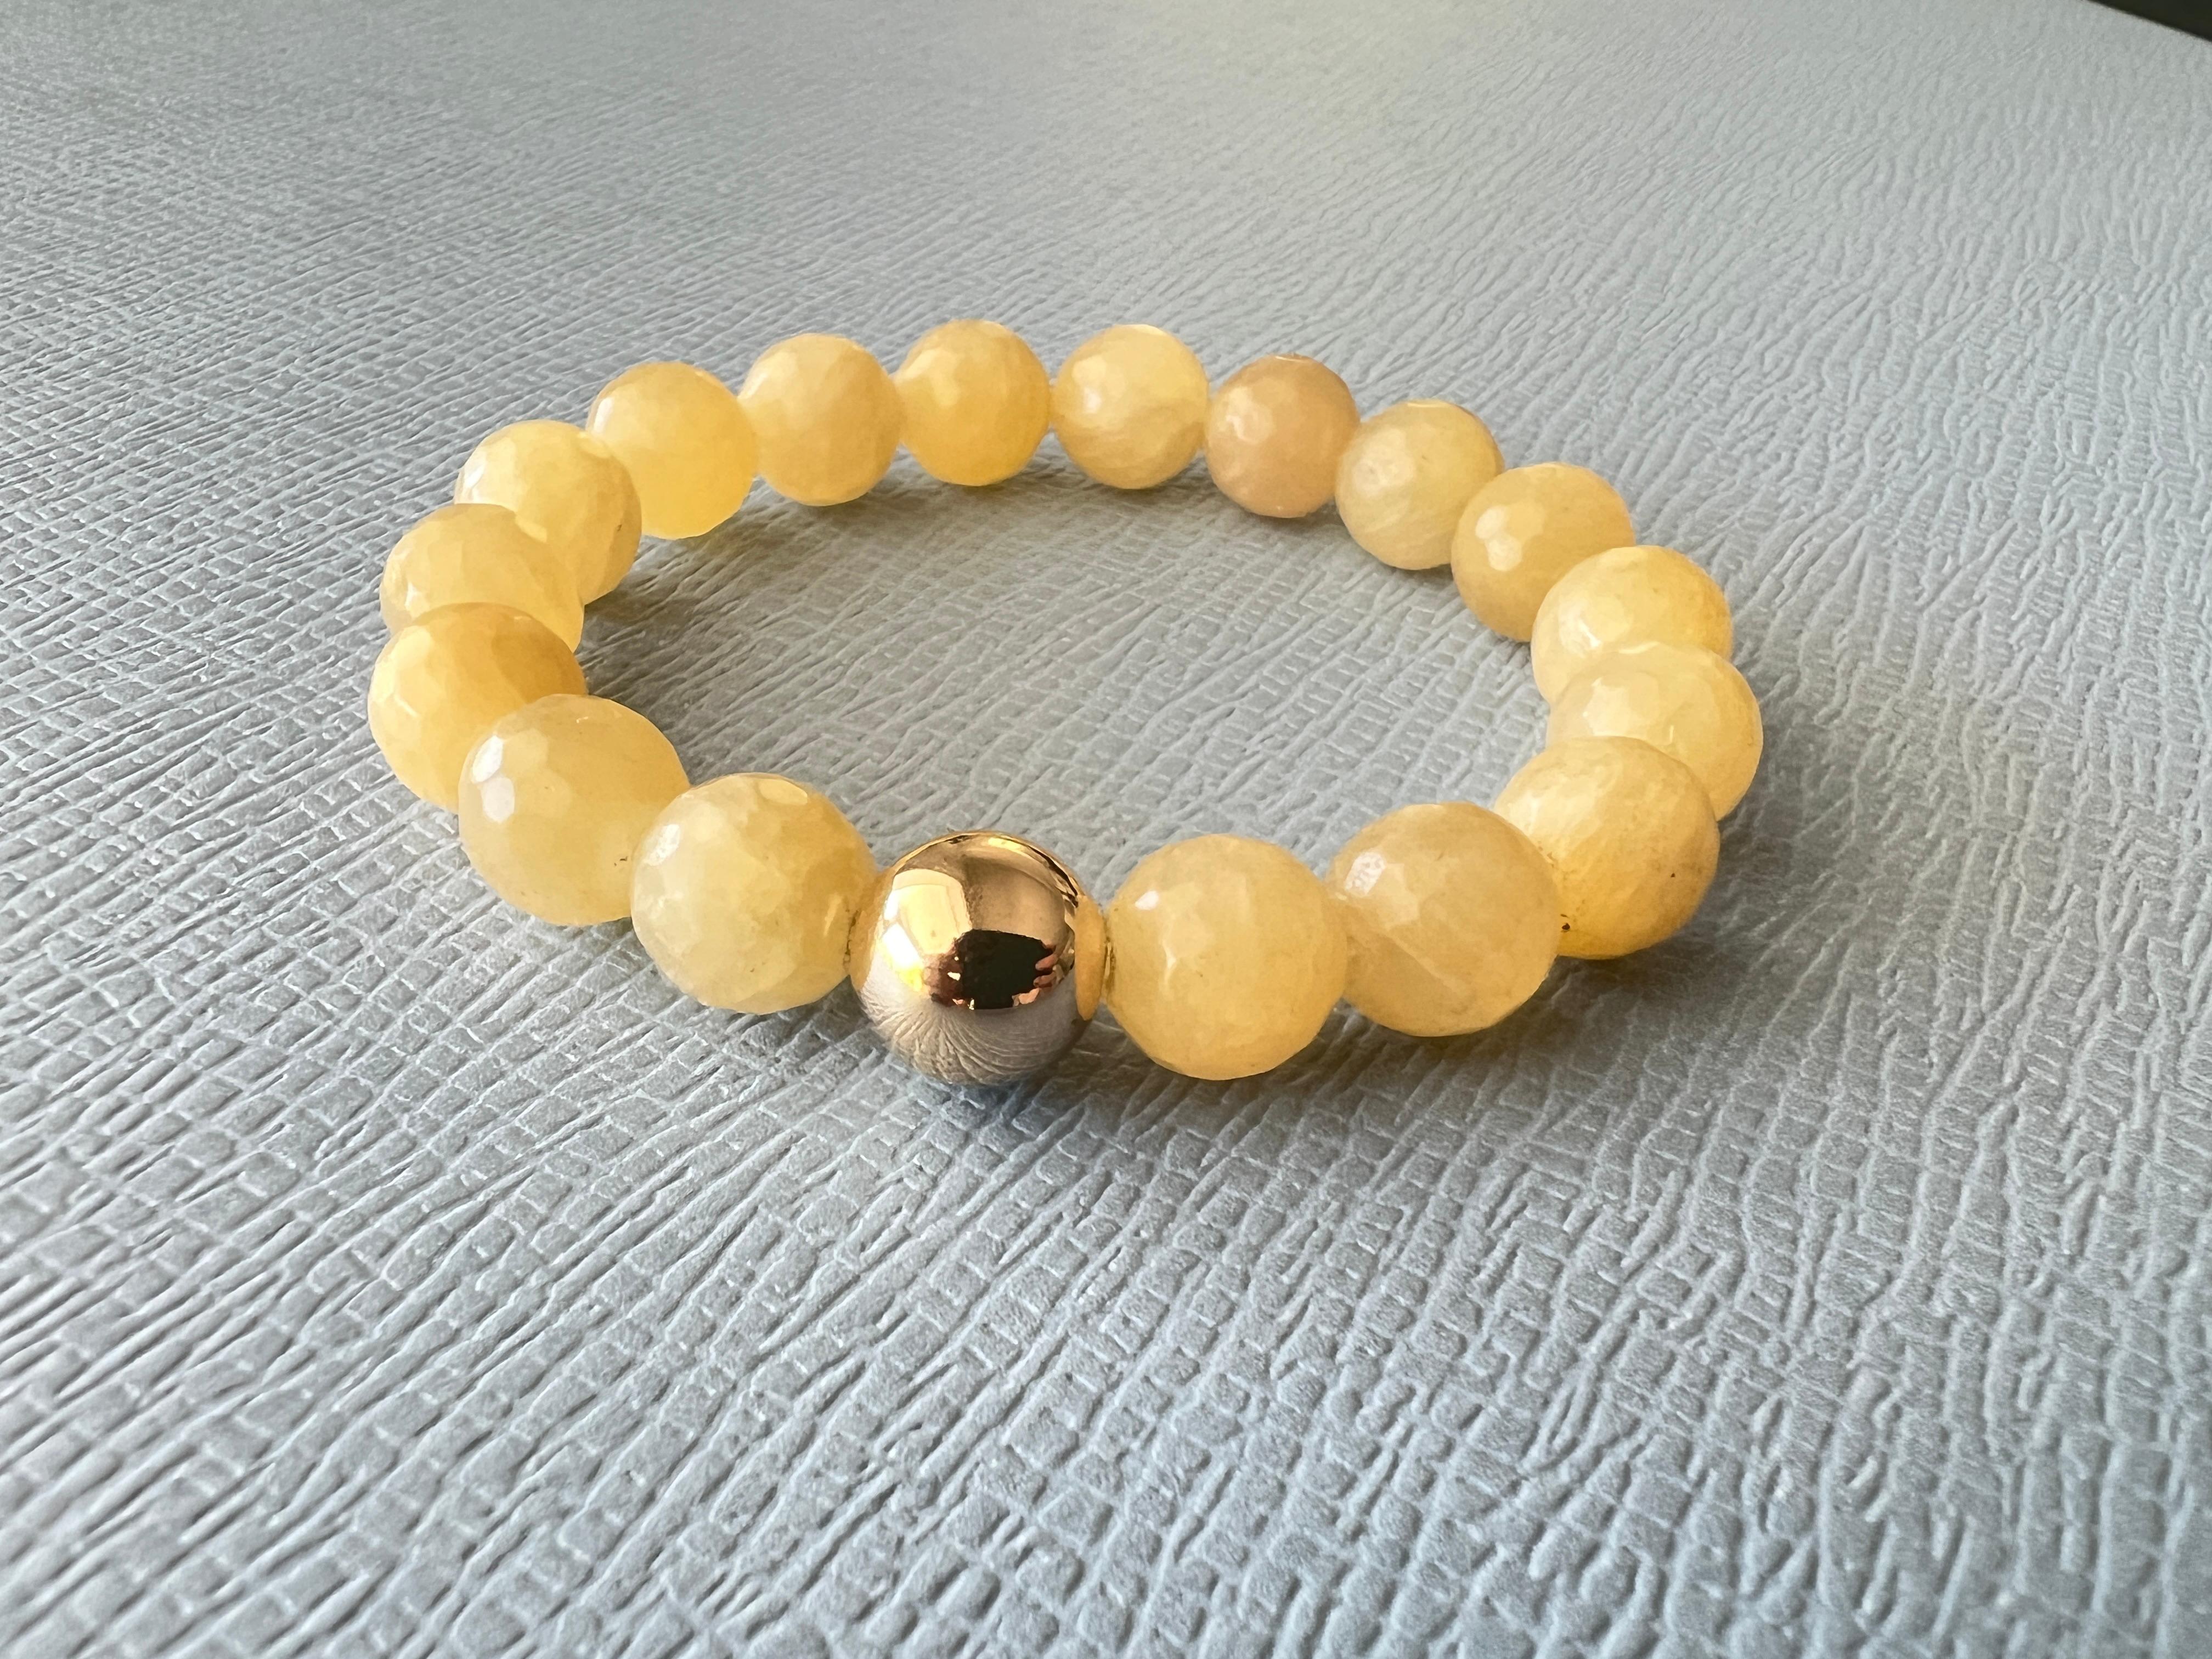 Yellow Calcite Round Facteted Bead Bracelet Gold Filled Bead J Dauphin For Sale 4